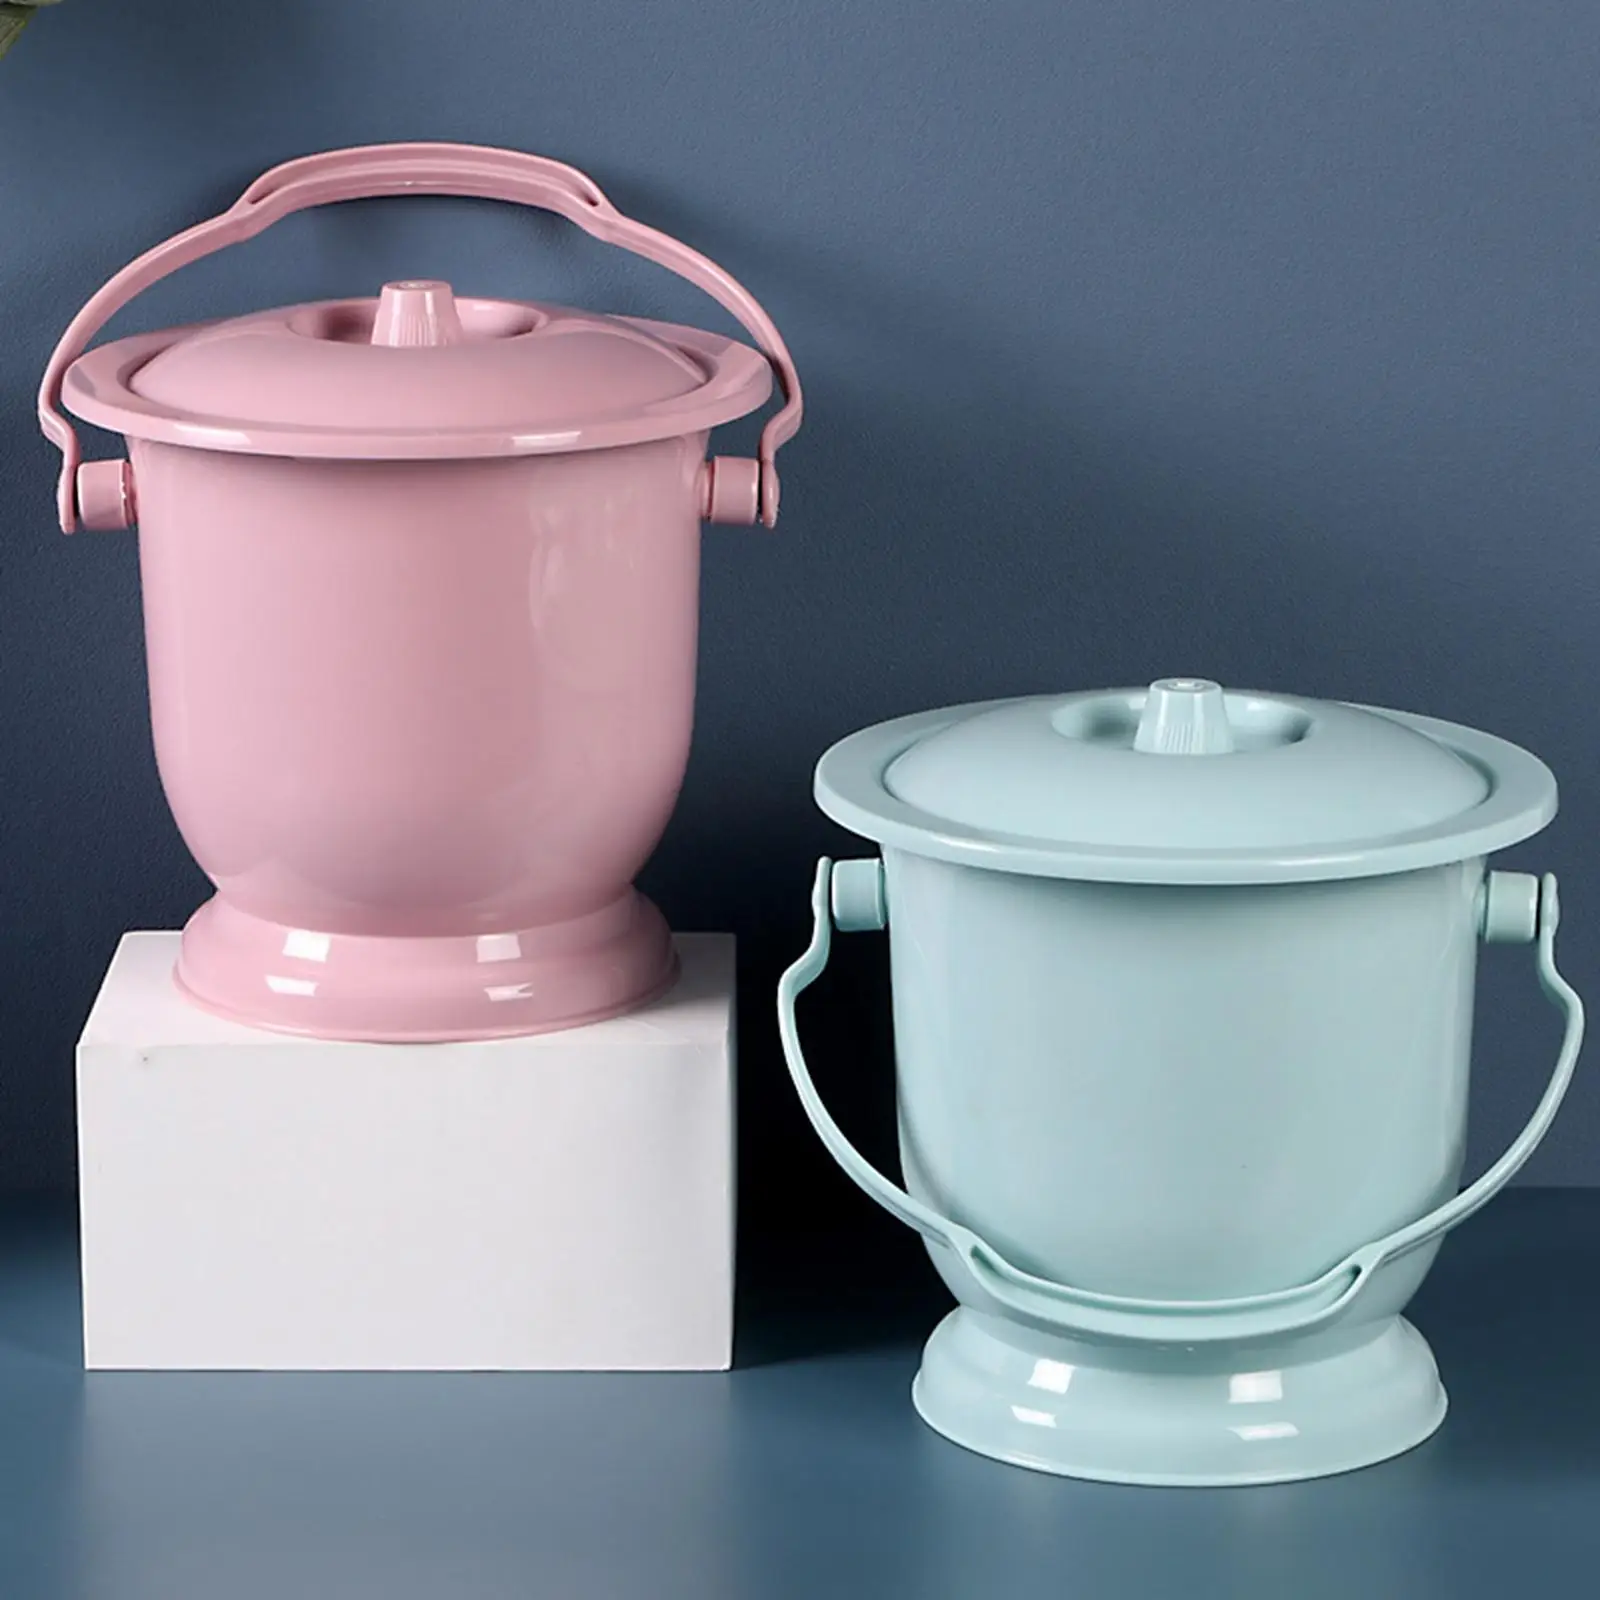 Handheld Spittoon with Lid  Use Fashion Practical  Bucket Mini Toilets for Household Women Bedroom Female Male